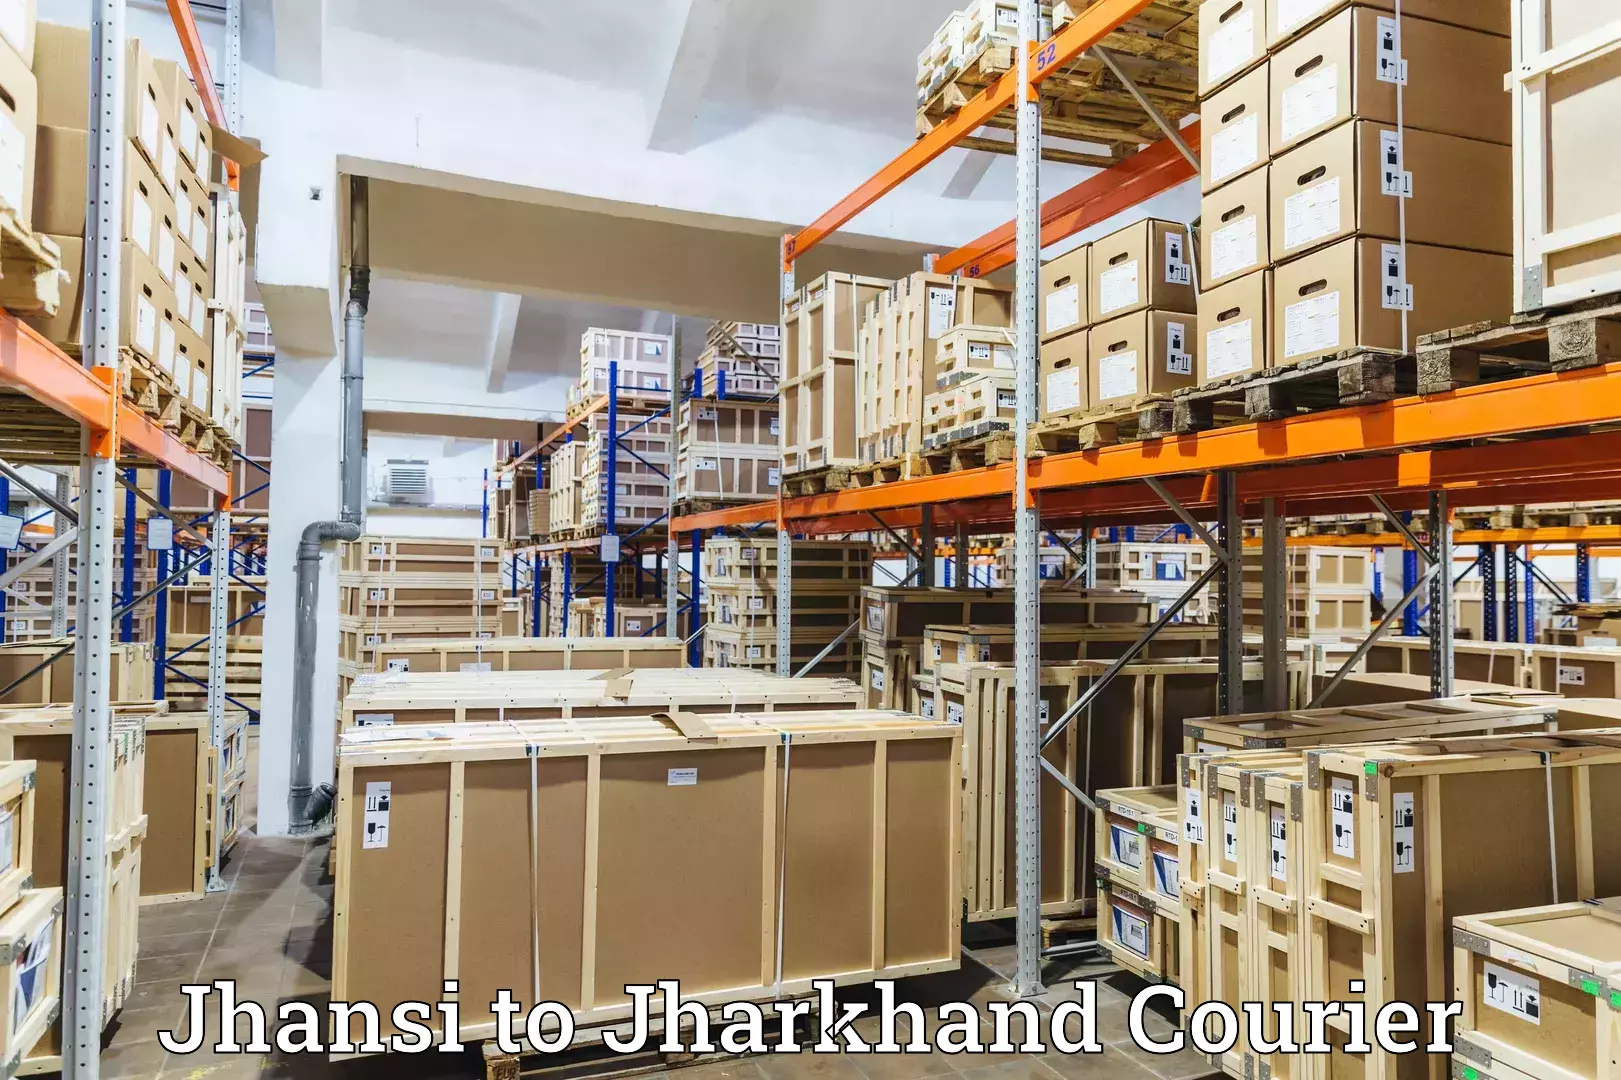 Local courier options Jhansi to Dhanbad